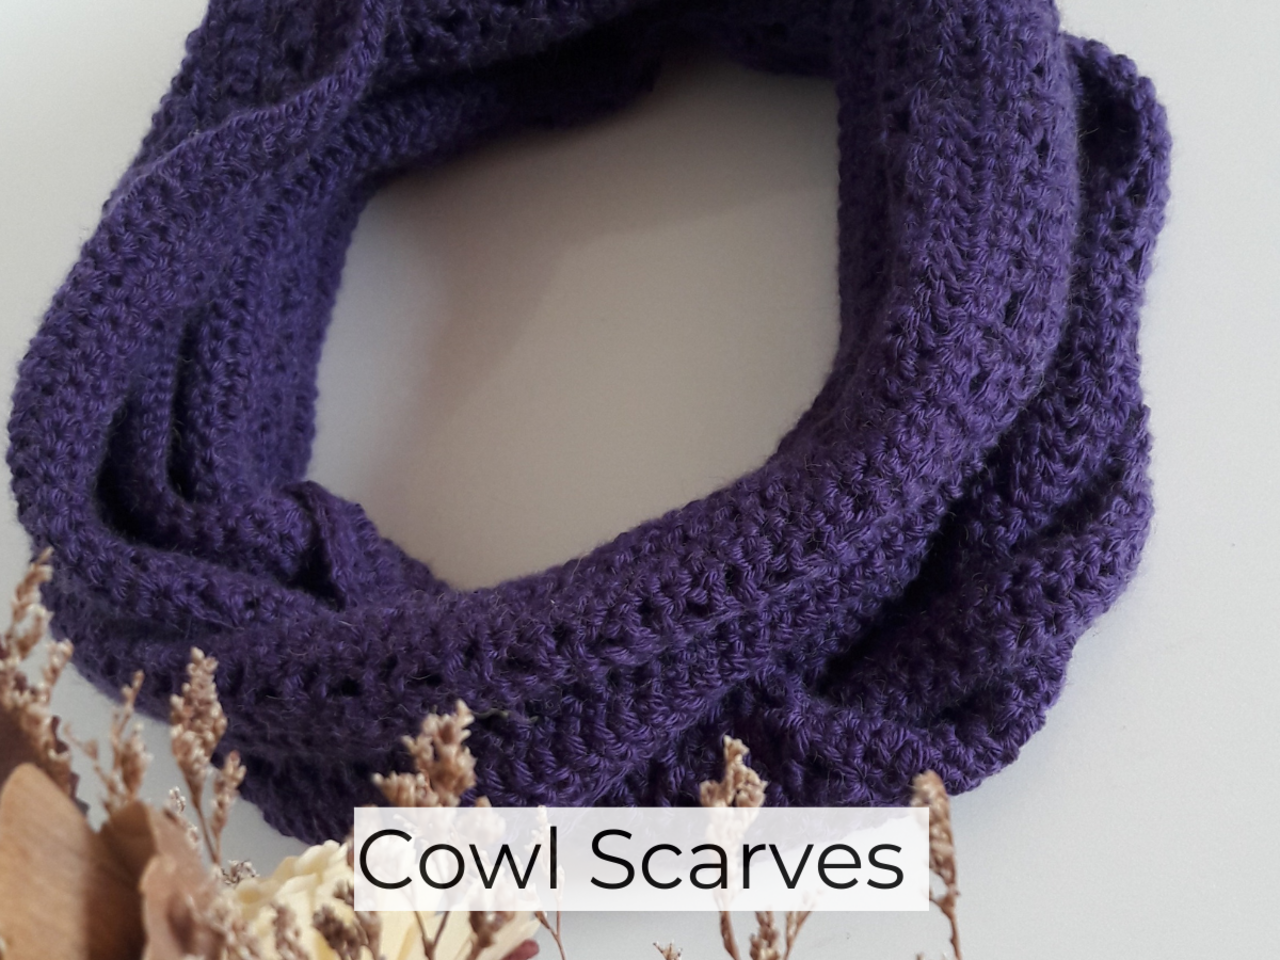 15 Scarf Rings ideas  scarf rings, scarf, how to wear scarves